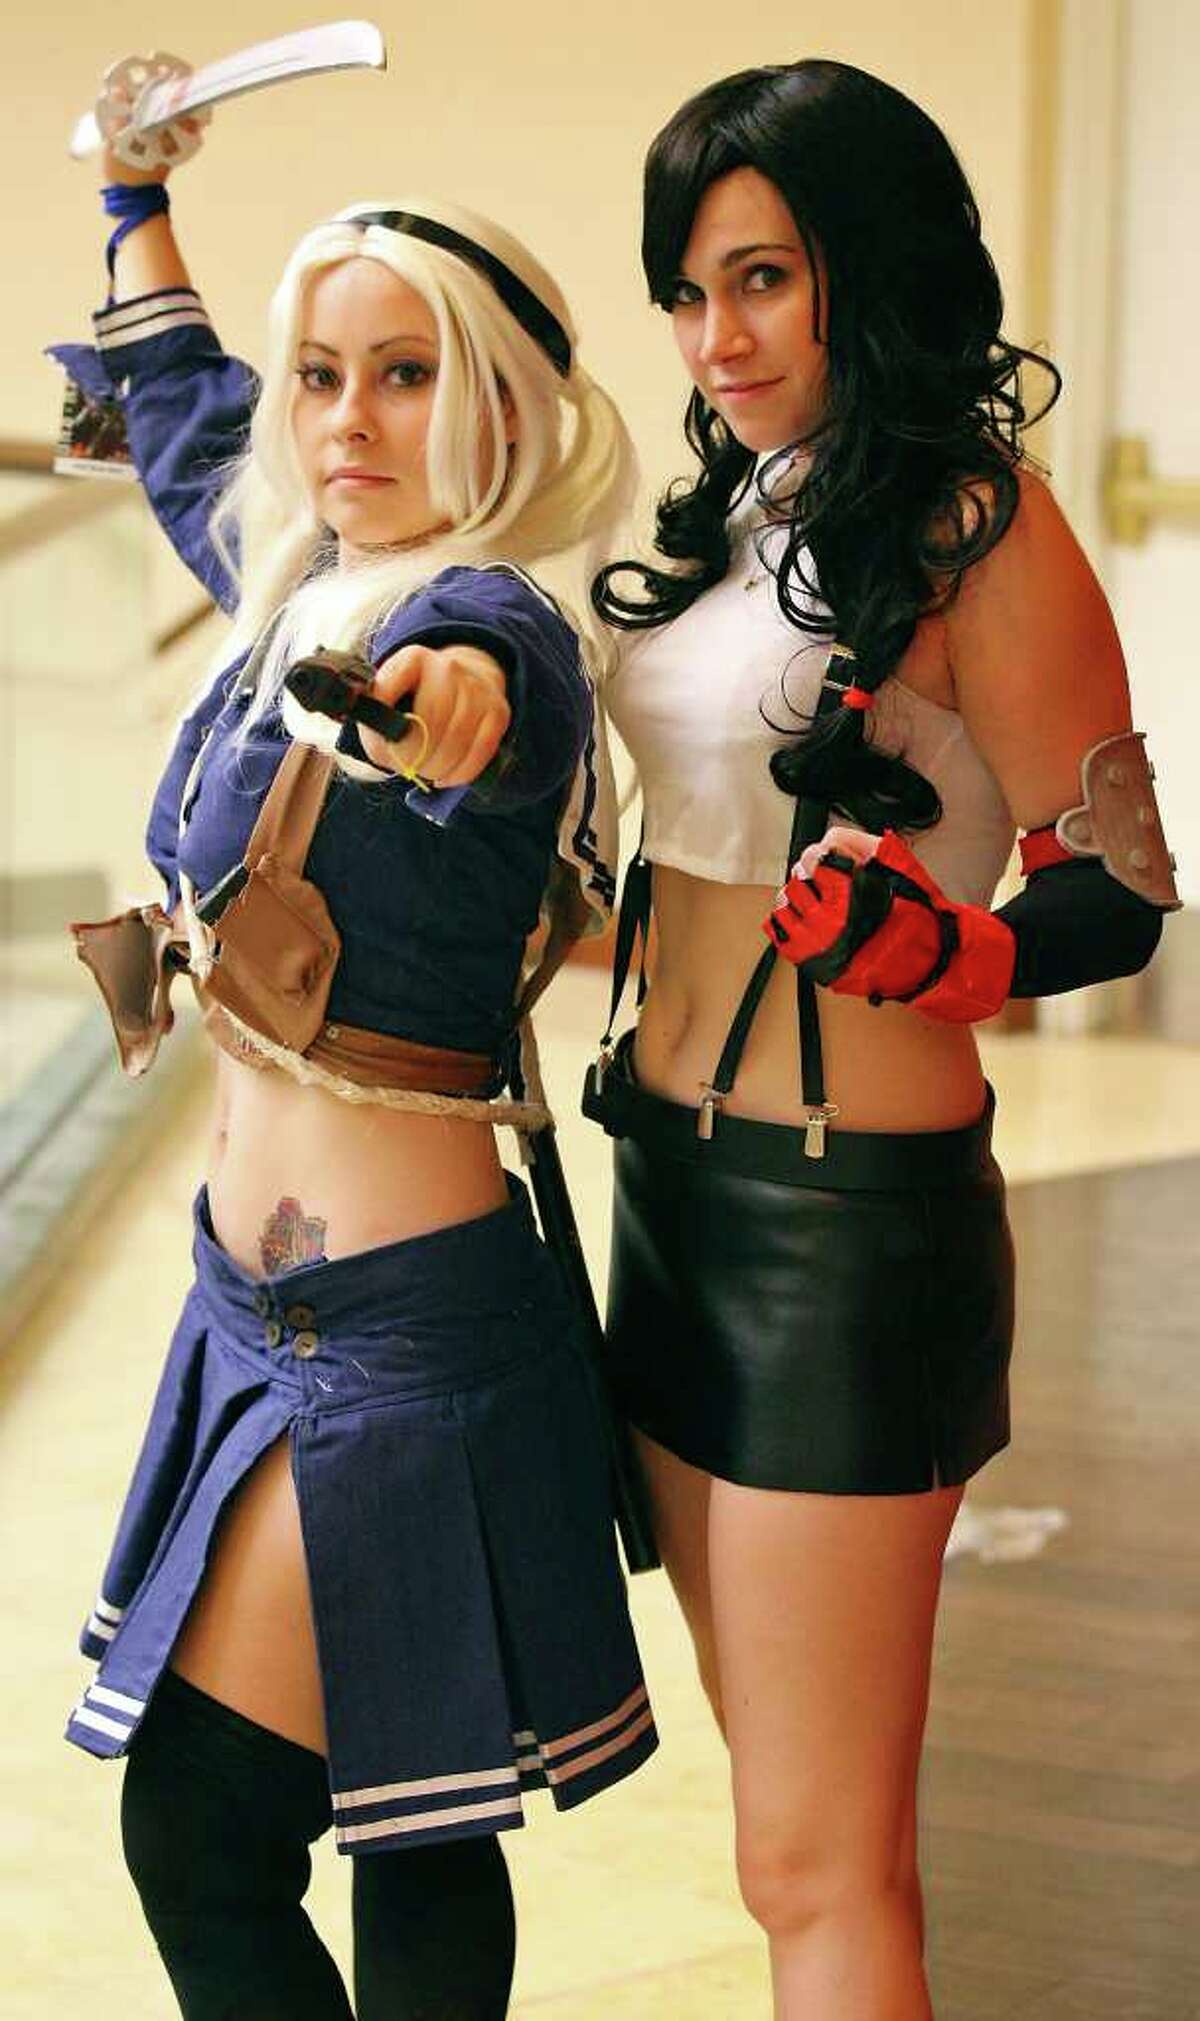 Ecaterina Perez, 26, as "Babydoll" (left) and Laura Gladney as "Tifa Lockhart" pose for a photo while attending the San Japan 4TW convention Saturday Aug. 6, 2011 at the Marriott Rivercenter.